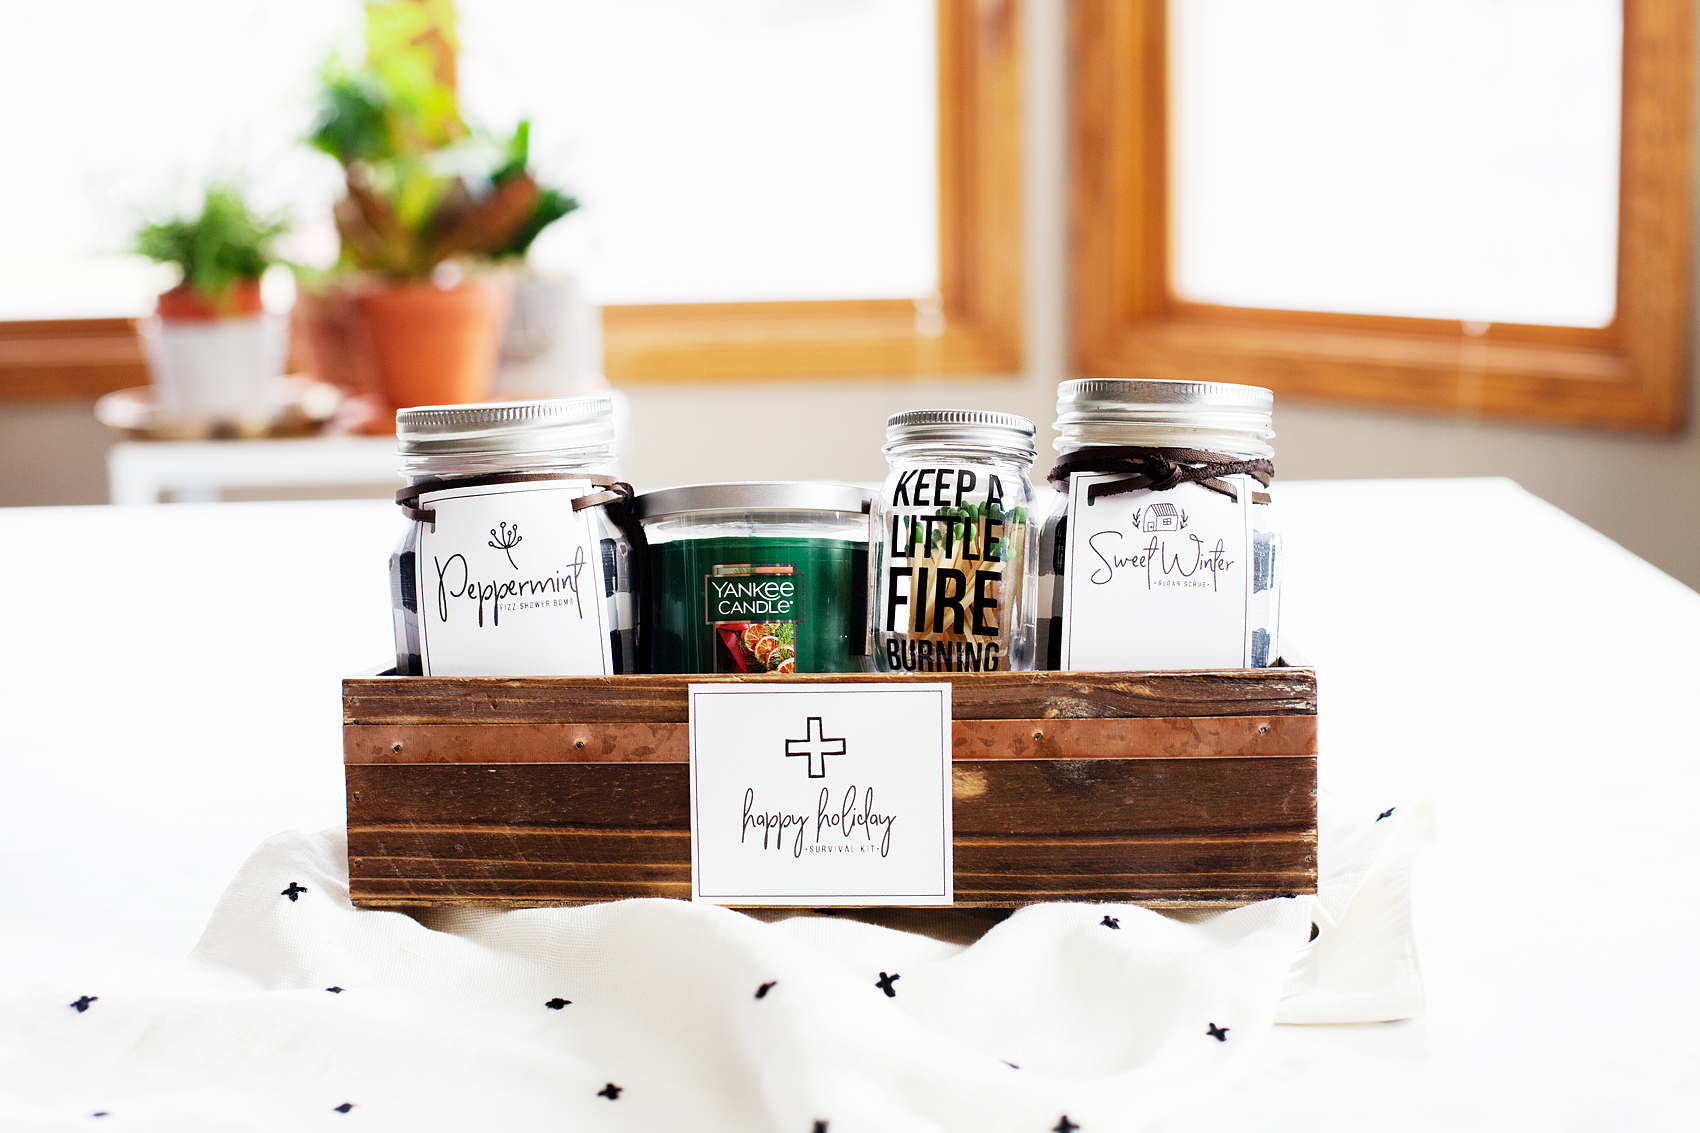 Love the Buffalo Check trend? Yep, me too! I thought it would be fun to use some of the Ball® Giving Jars to create some Buffalo Check Jars to use as gifts this Holiday Season. Here's how you can make some of your own.